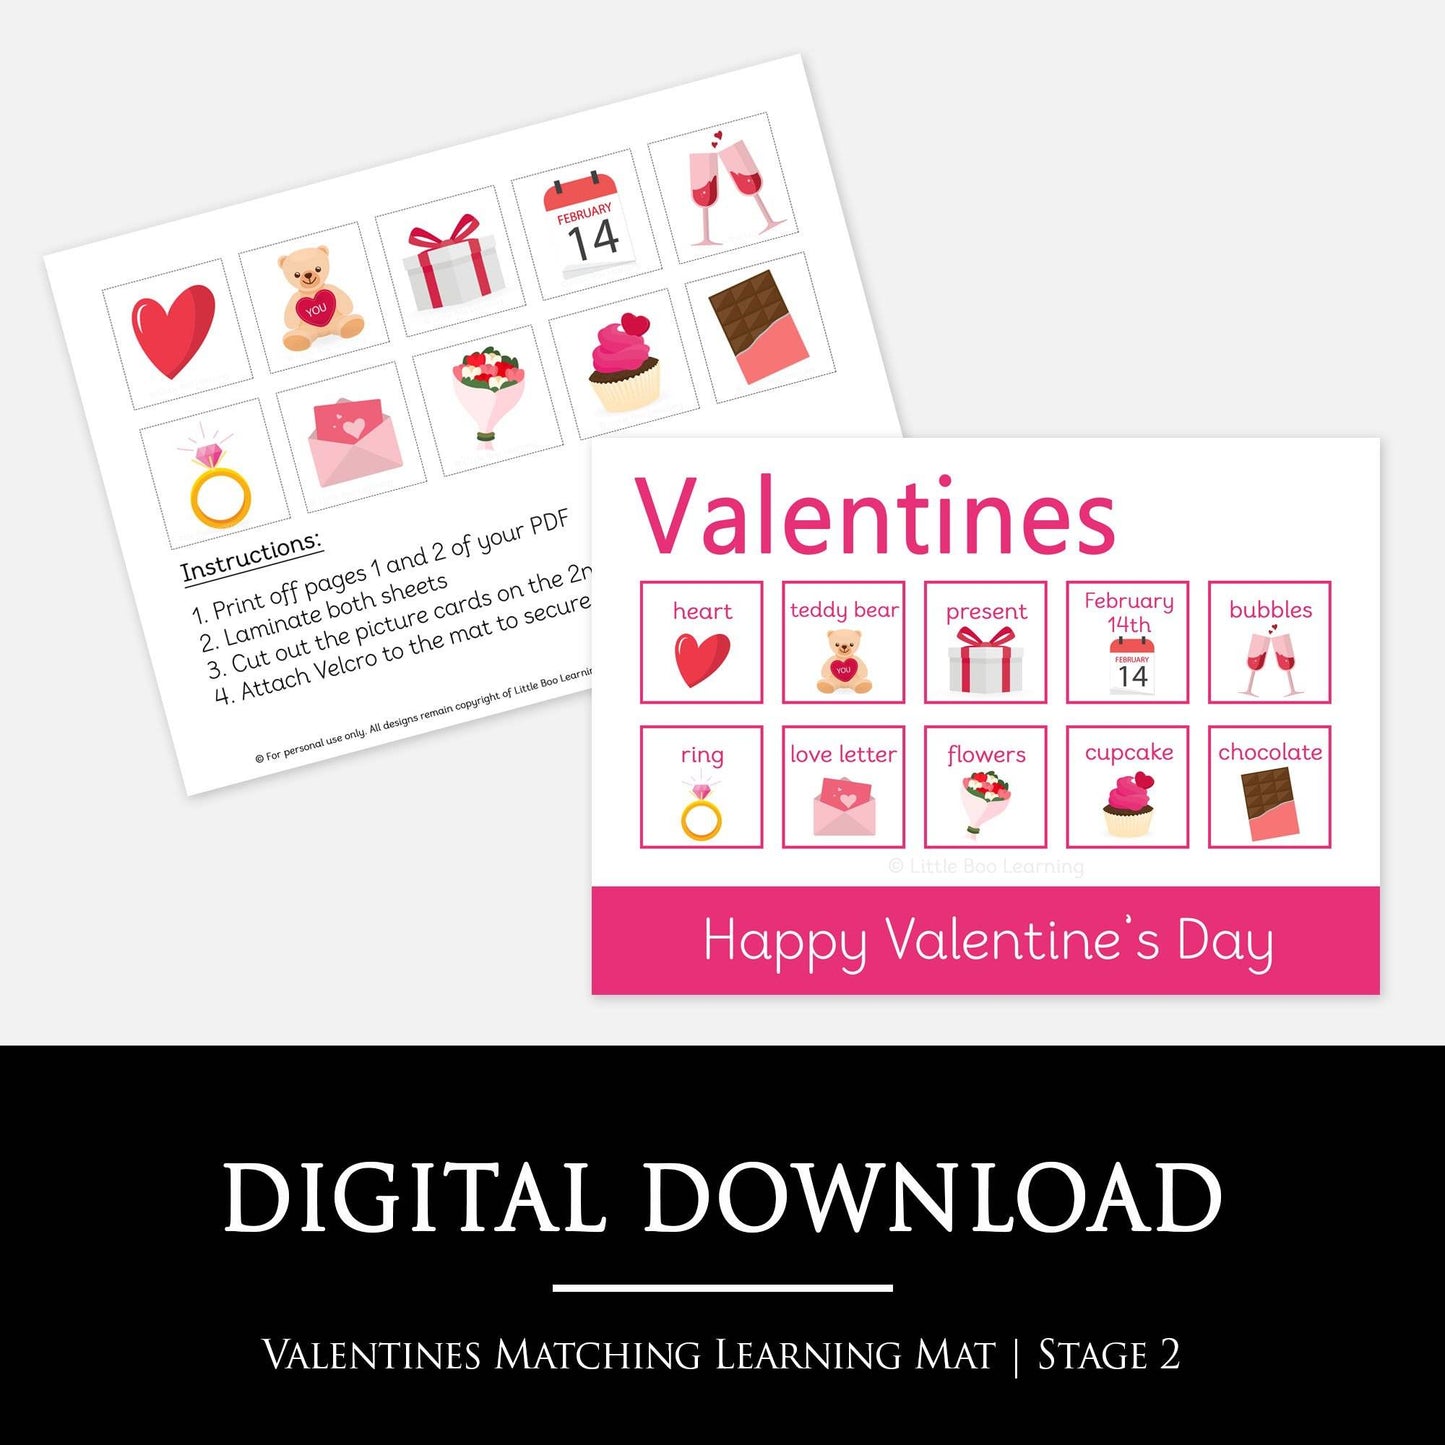 Valentines Matching Learning Mat - STAGE 2 | Digital Download-Little Boo Learning-Valentines